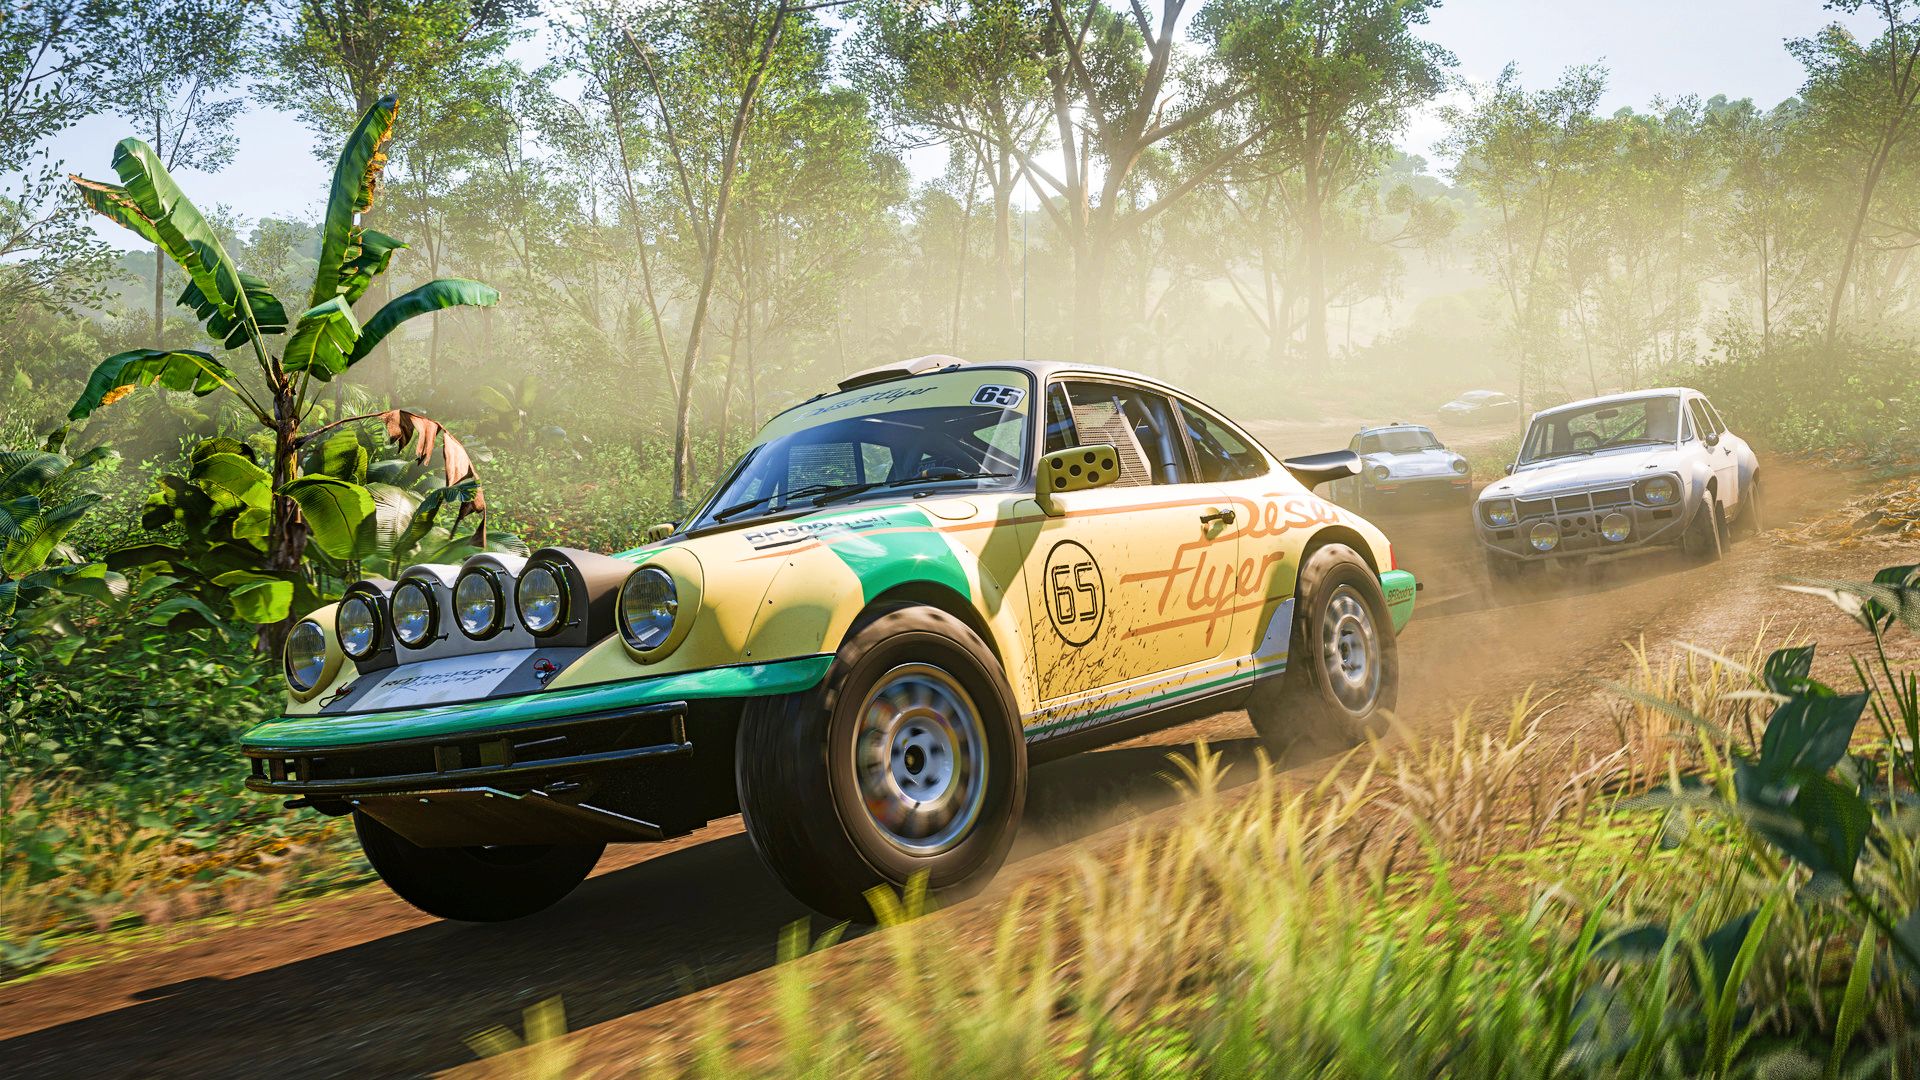 Project Cars is a beautiful racing sim with A.I. that drives like